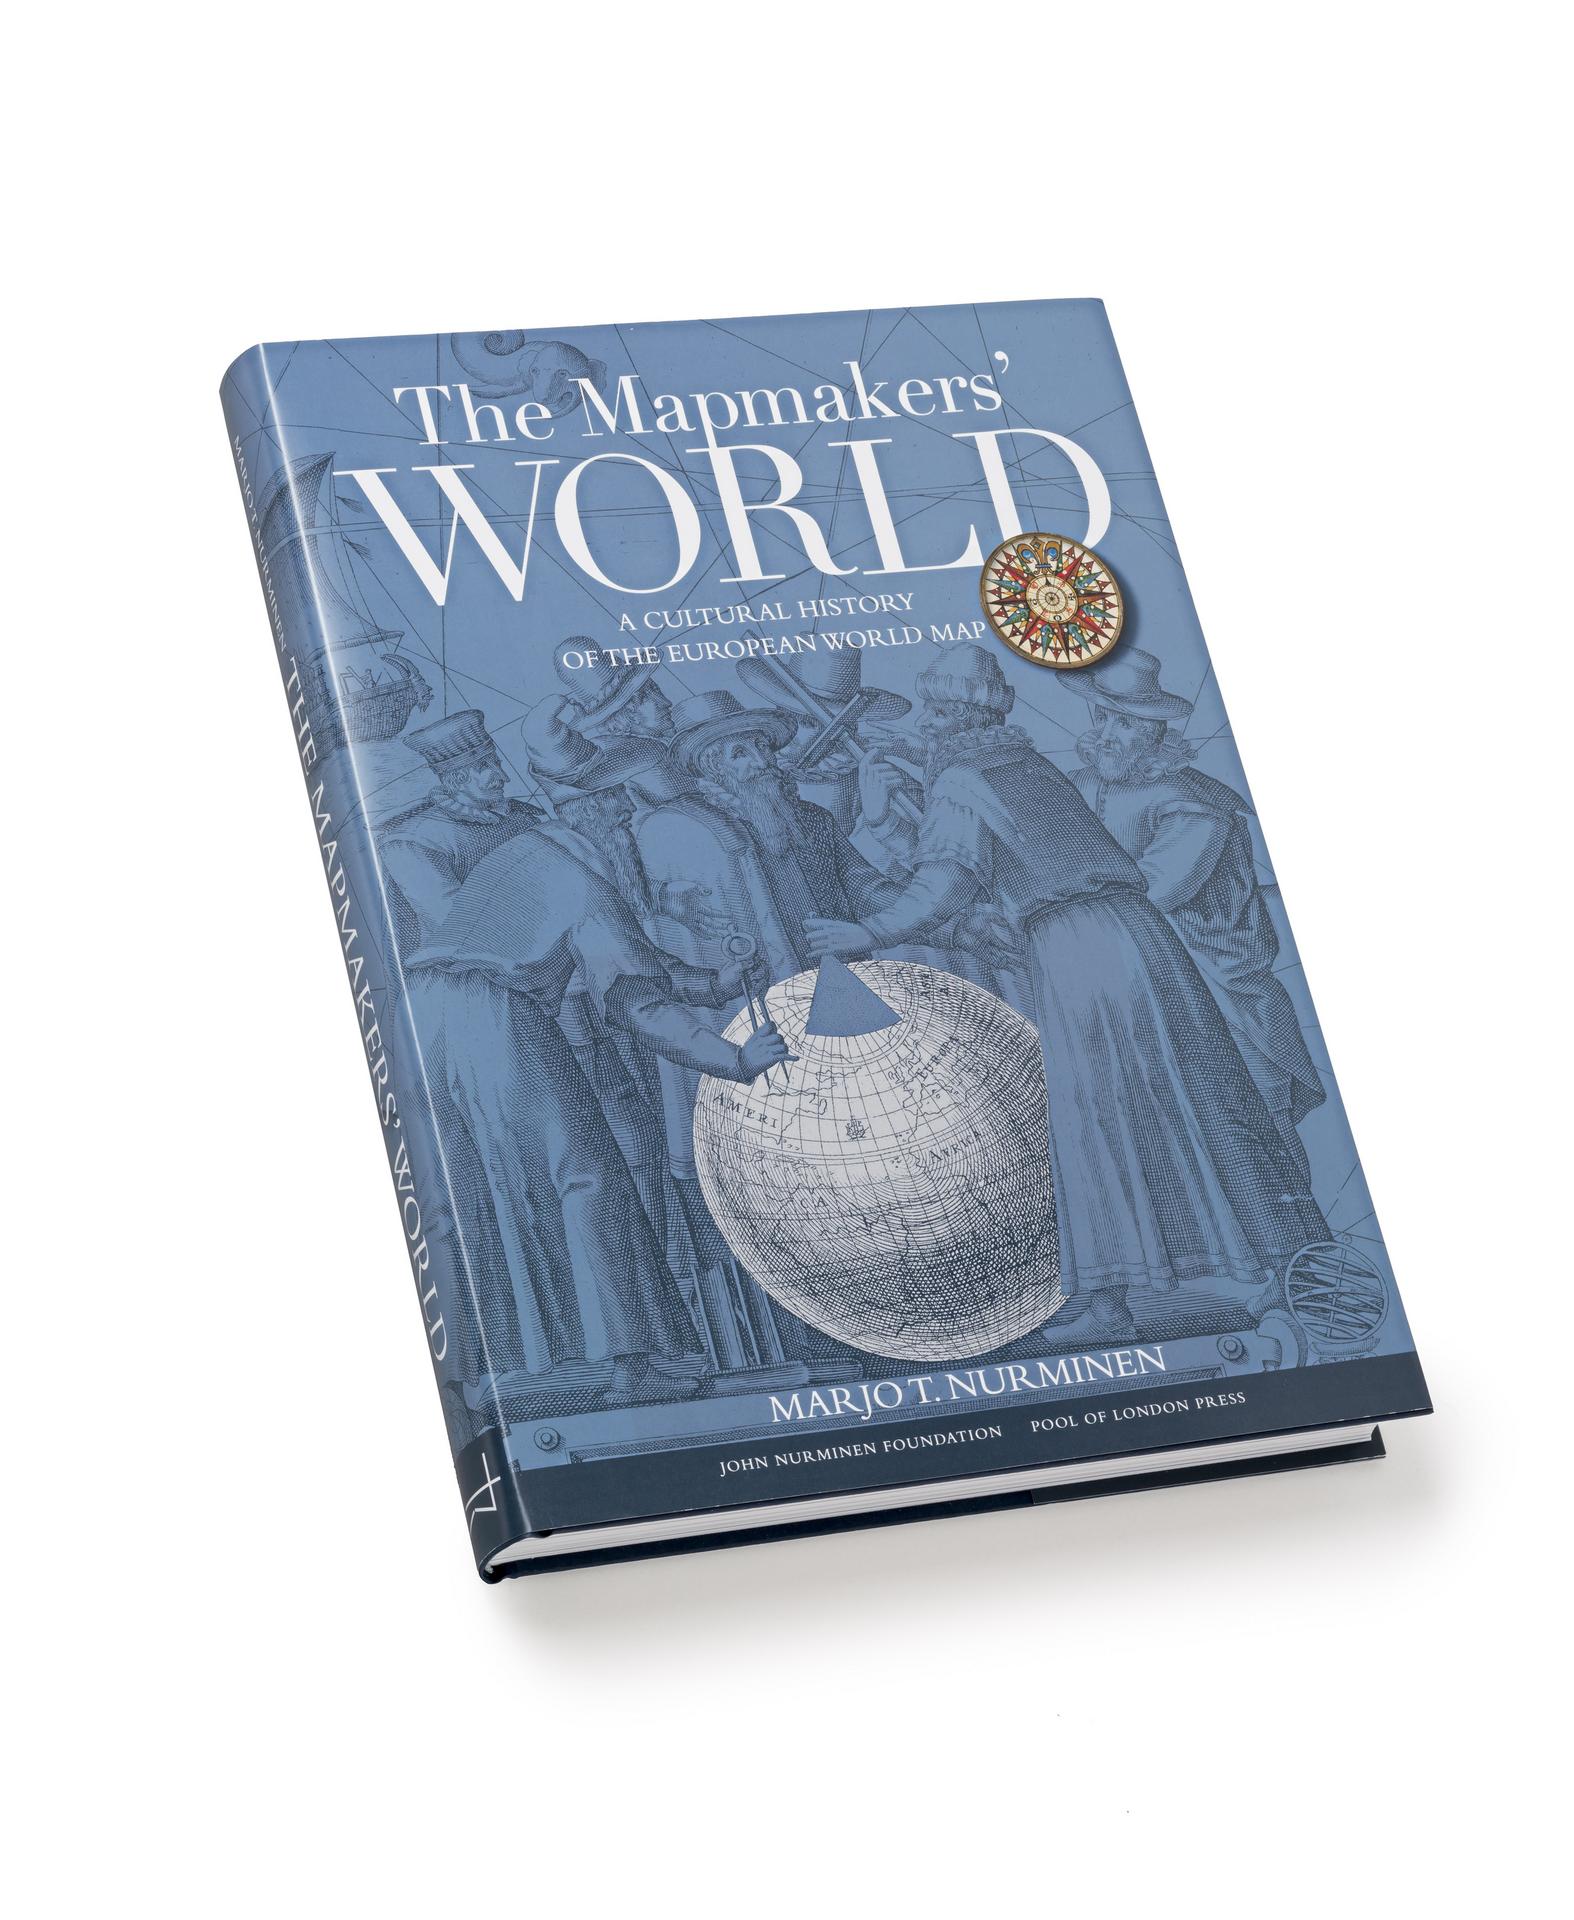 The Mapmakers' World cover.